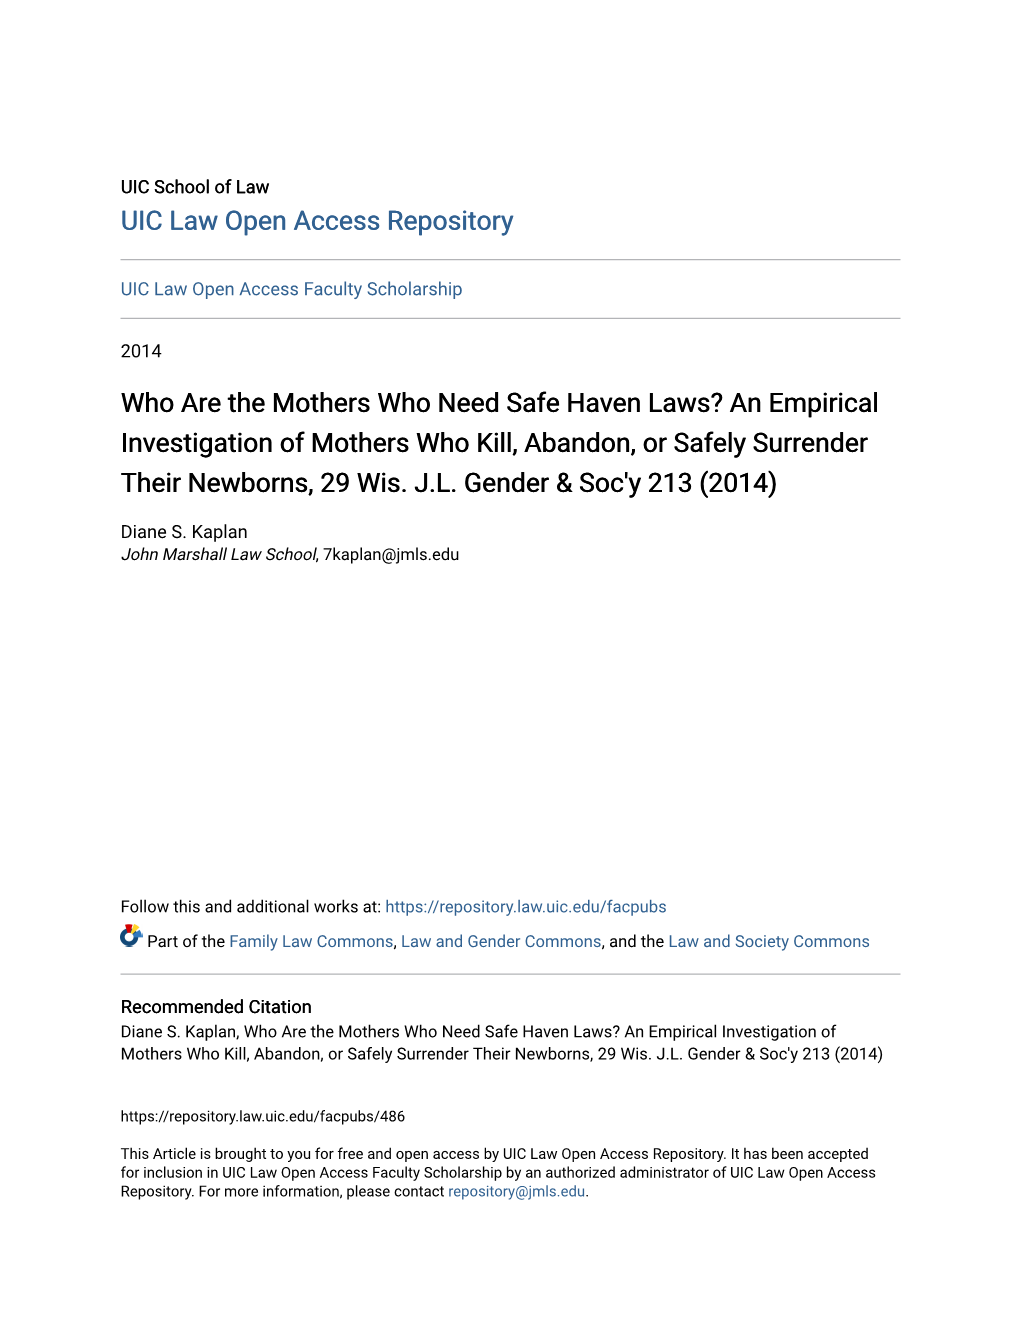 Who Are the Mothers Who Need Safe Haven Laws? an Empirical Investigation of Mothers Who Kill, Abandon, Or Safely Surrender Their Newborns, 29 Wis